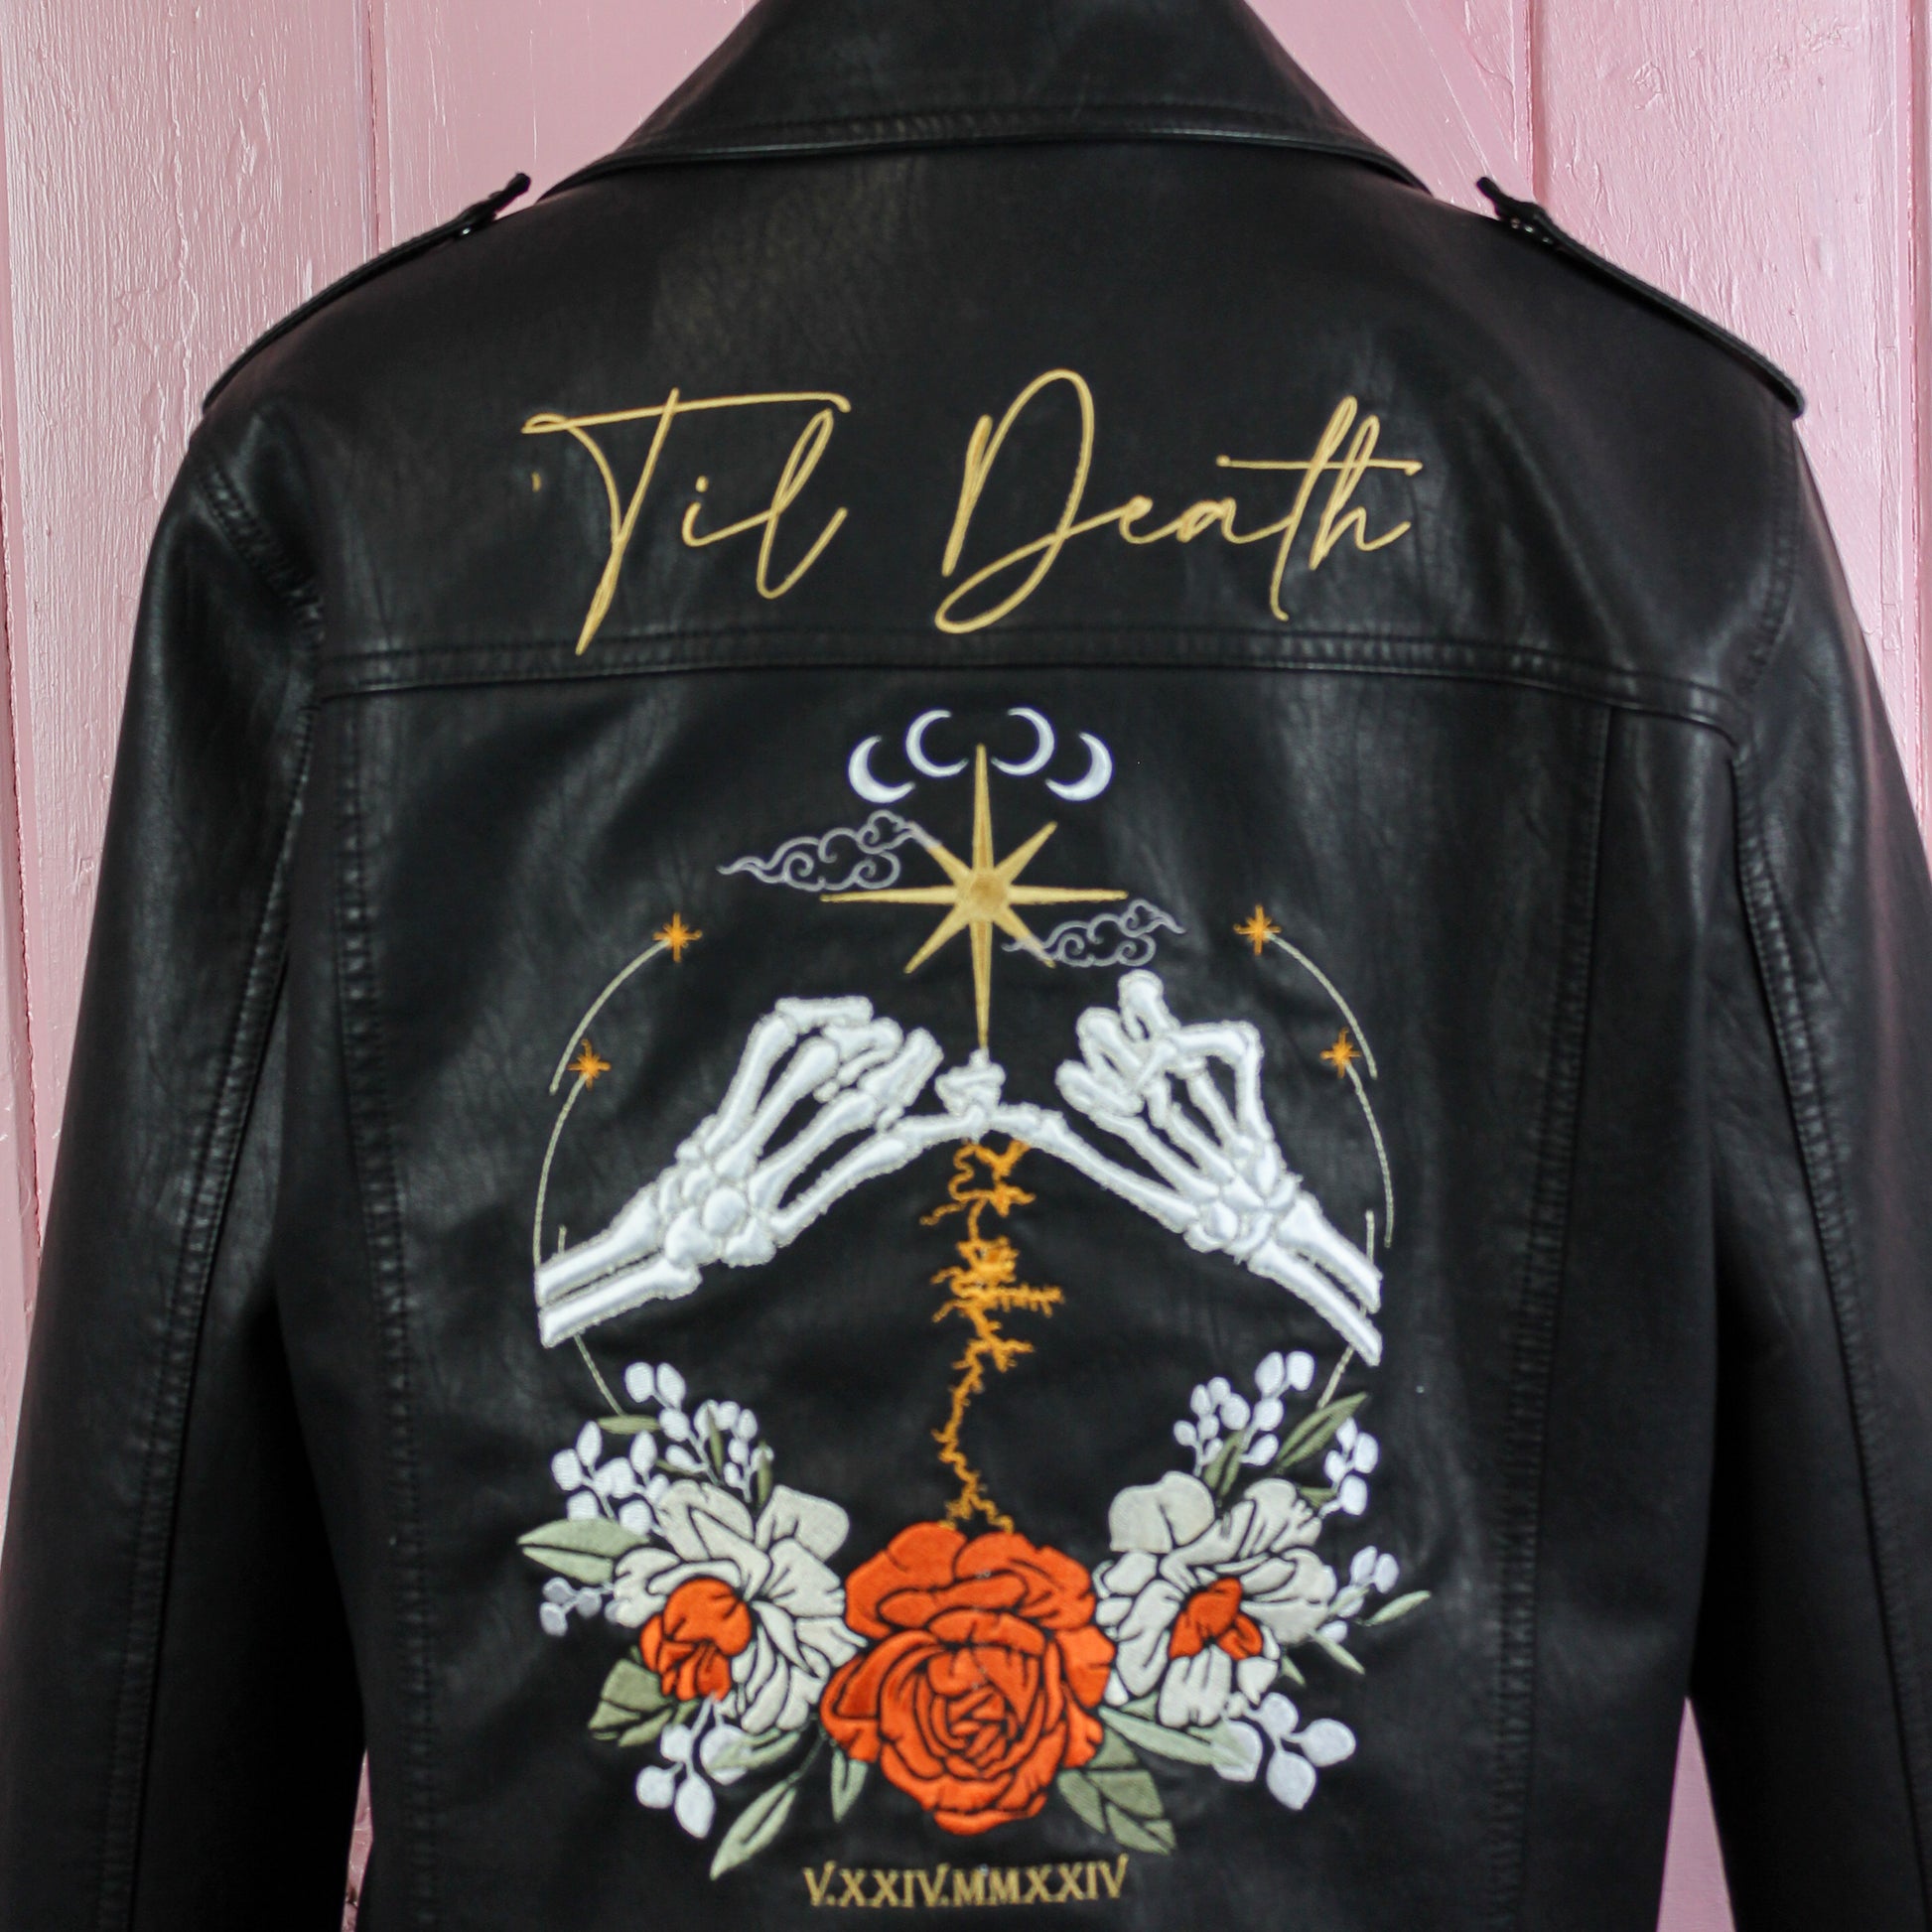 Bride's black leather jacket with celestial and floral motifs